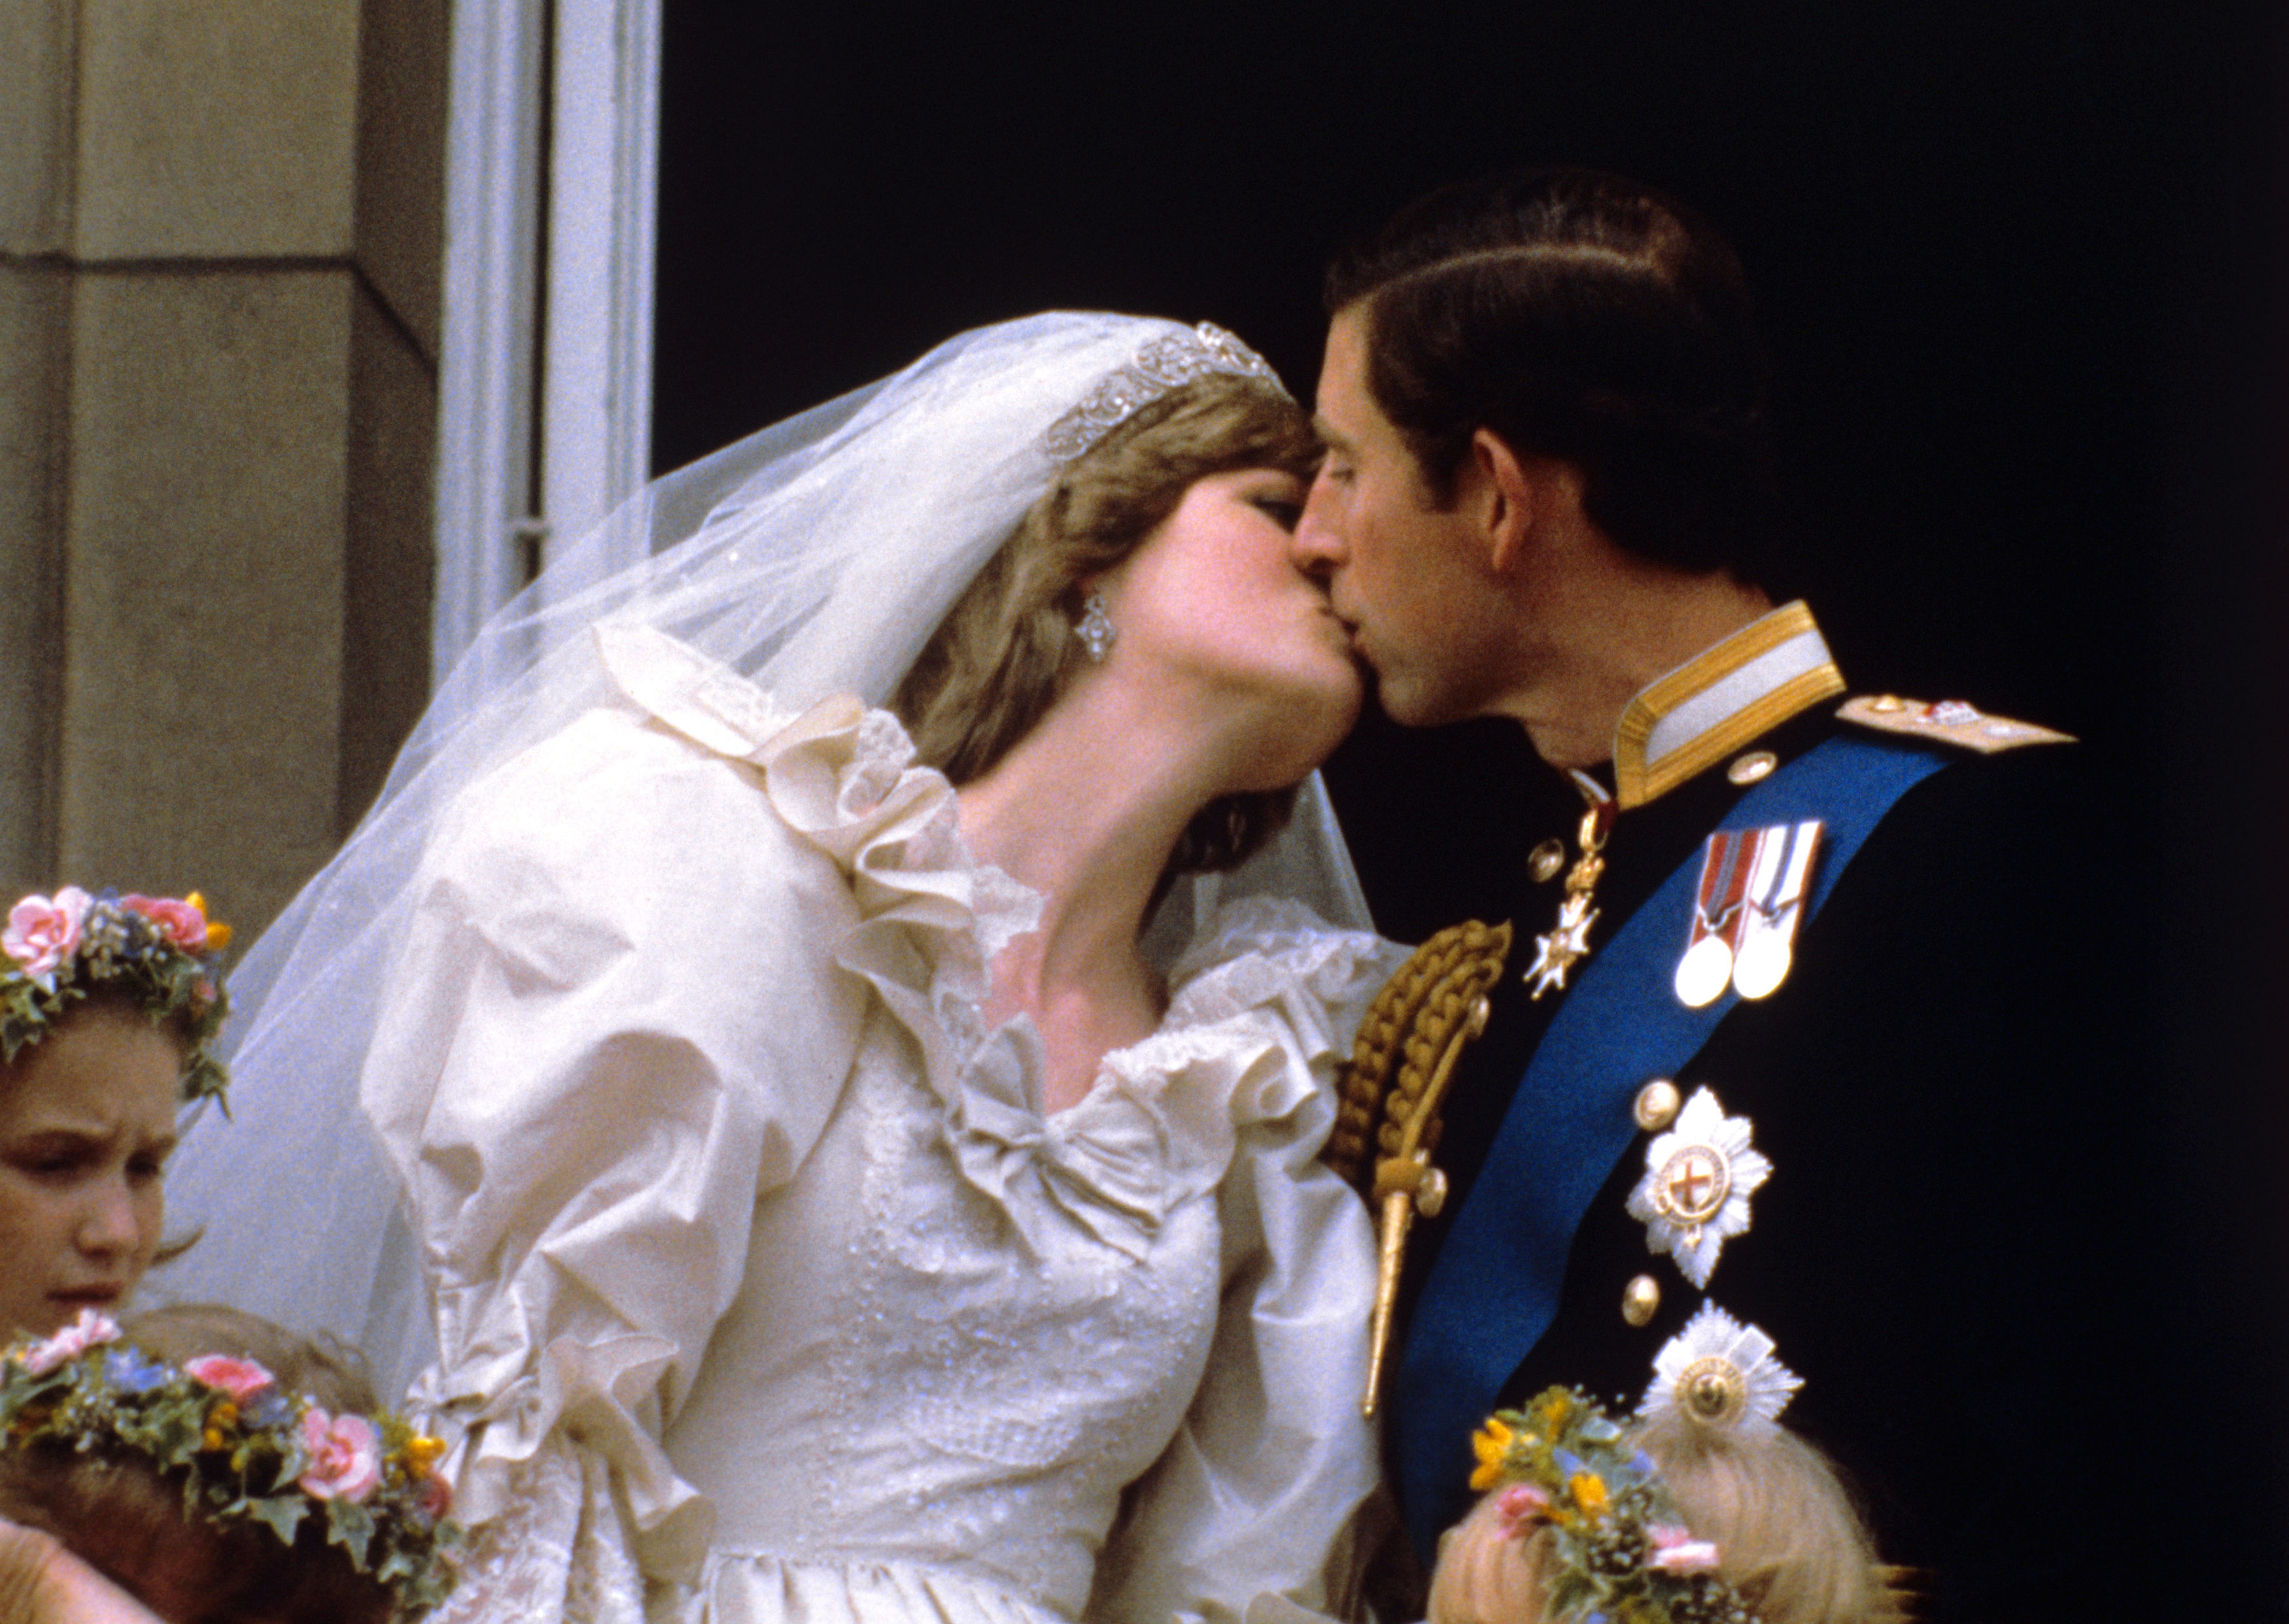 The Prince and Princess of Wales kissing on the balcony of Buckingham Palace, London, after their wedding (PA)